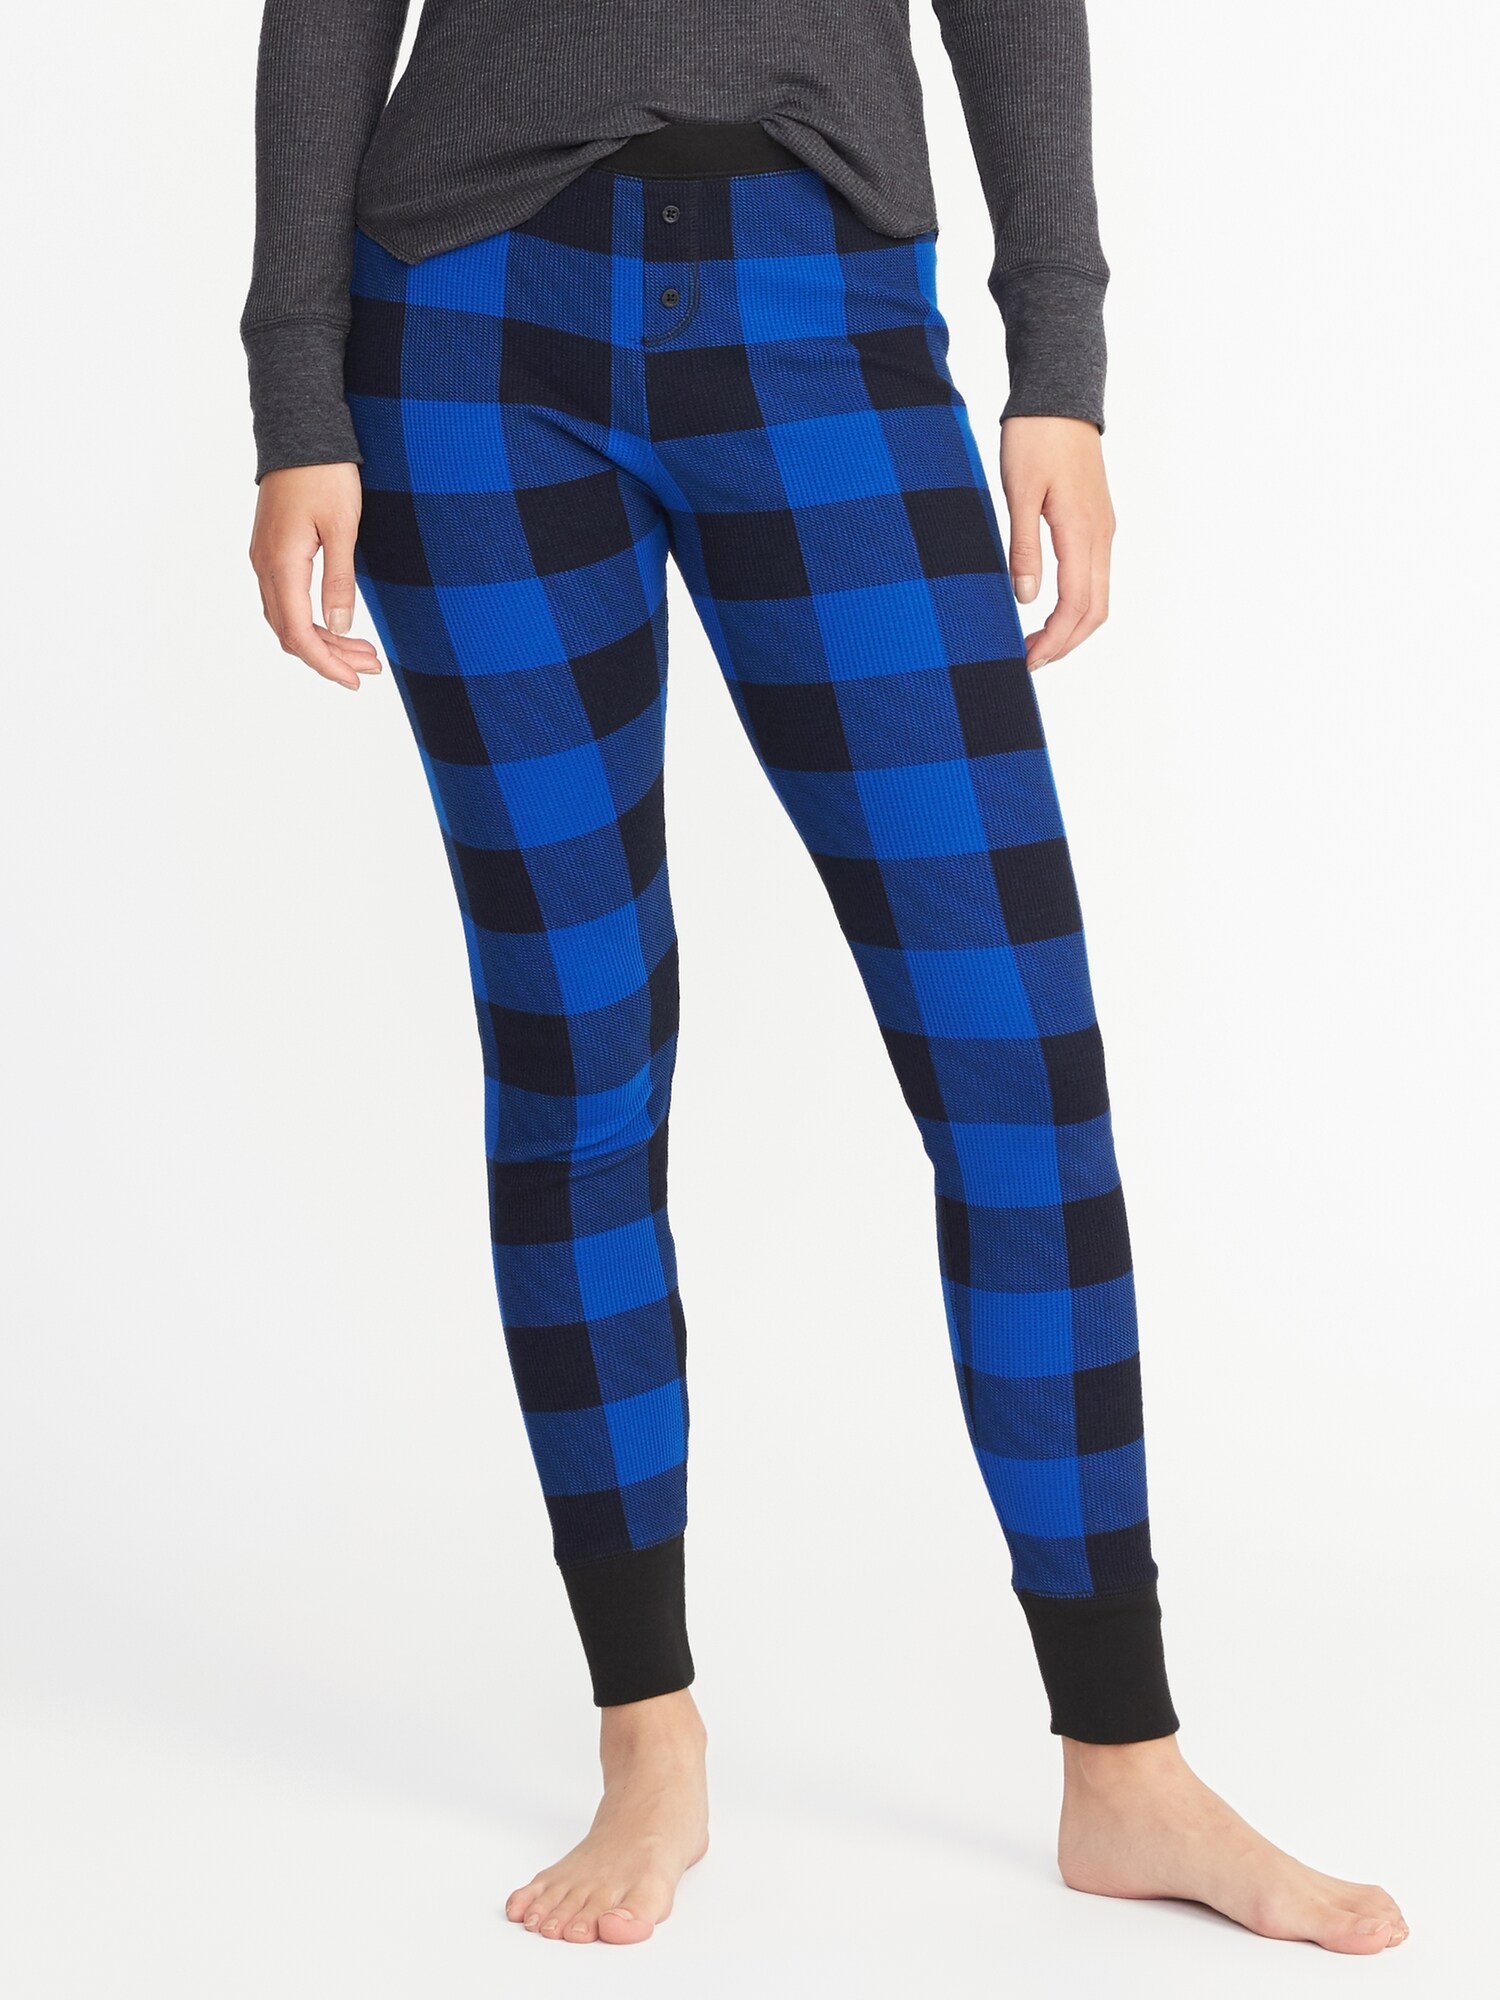 Patterned Thermal-Knit Sleep Leggings for Women, Old Navy